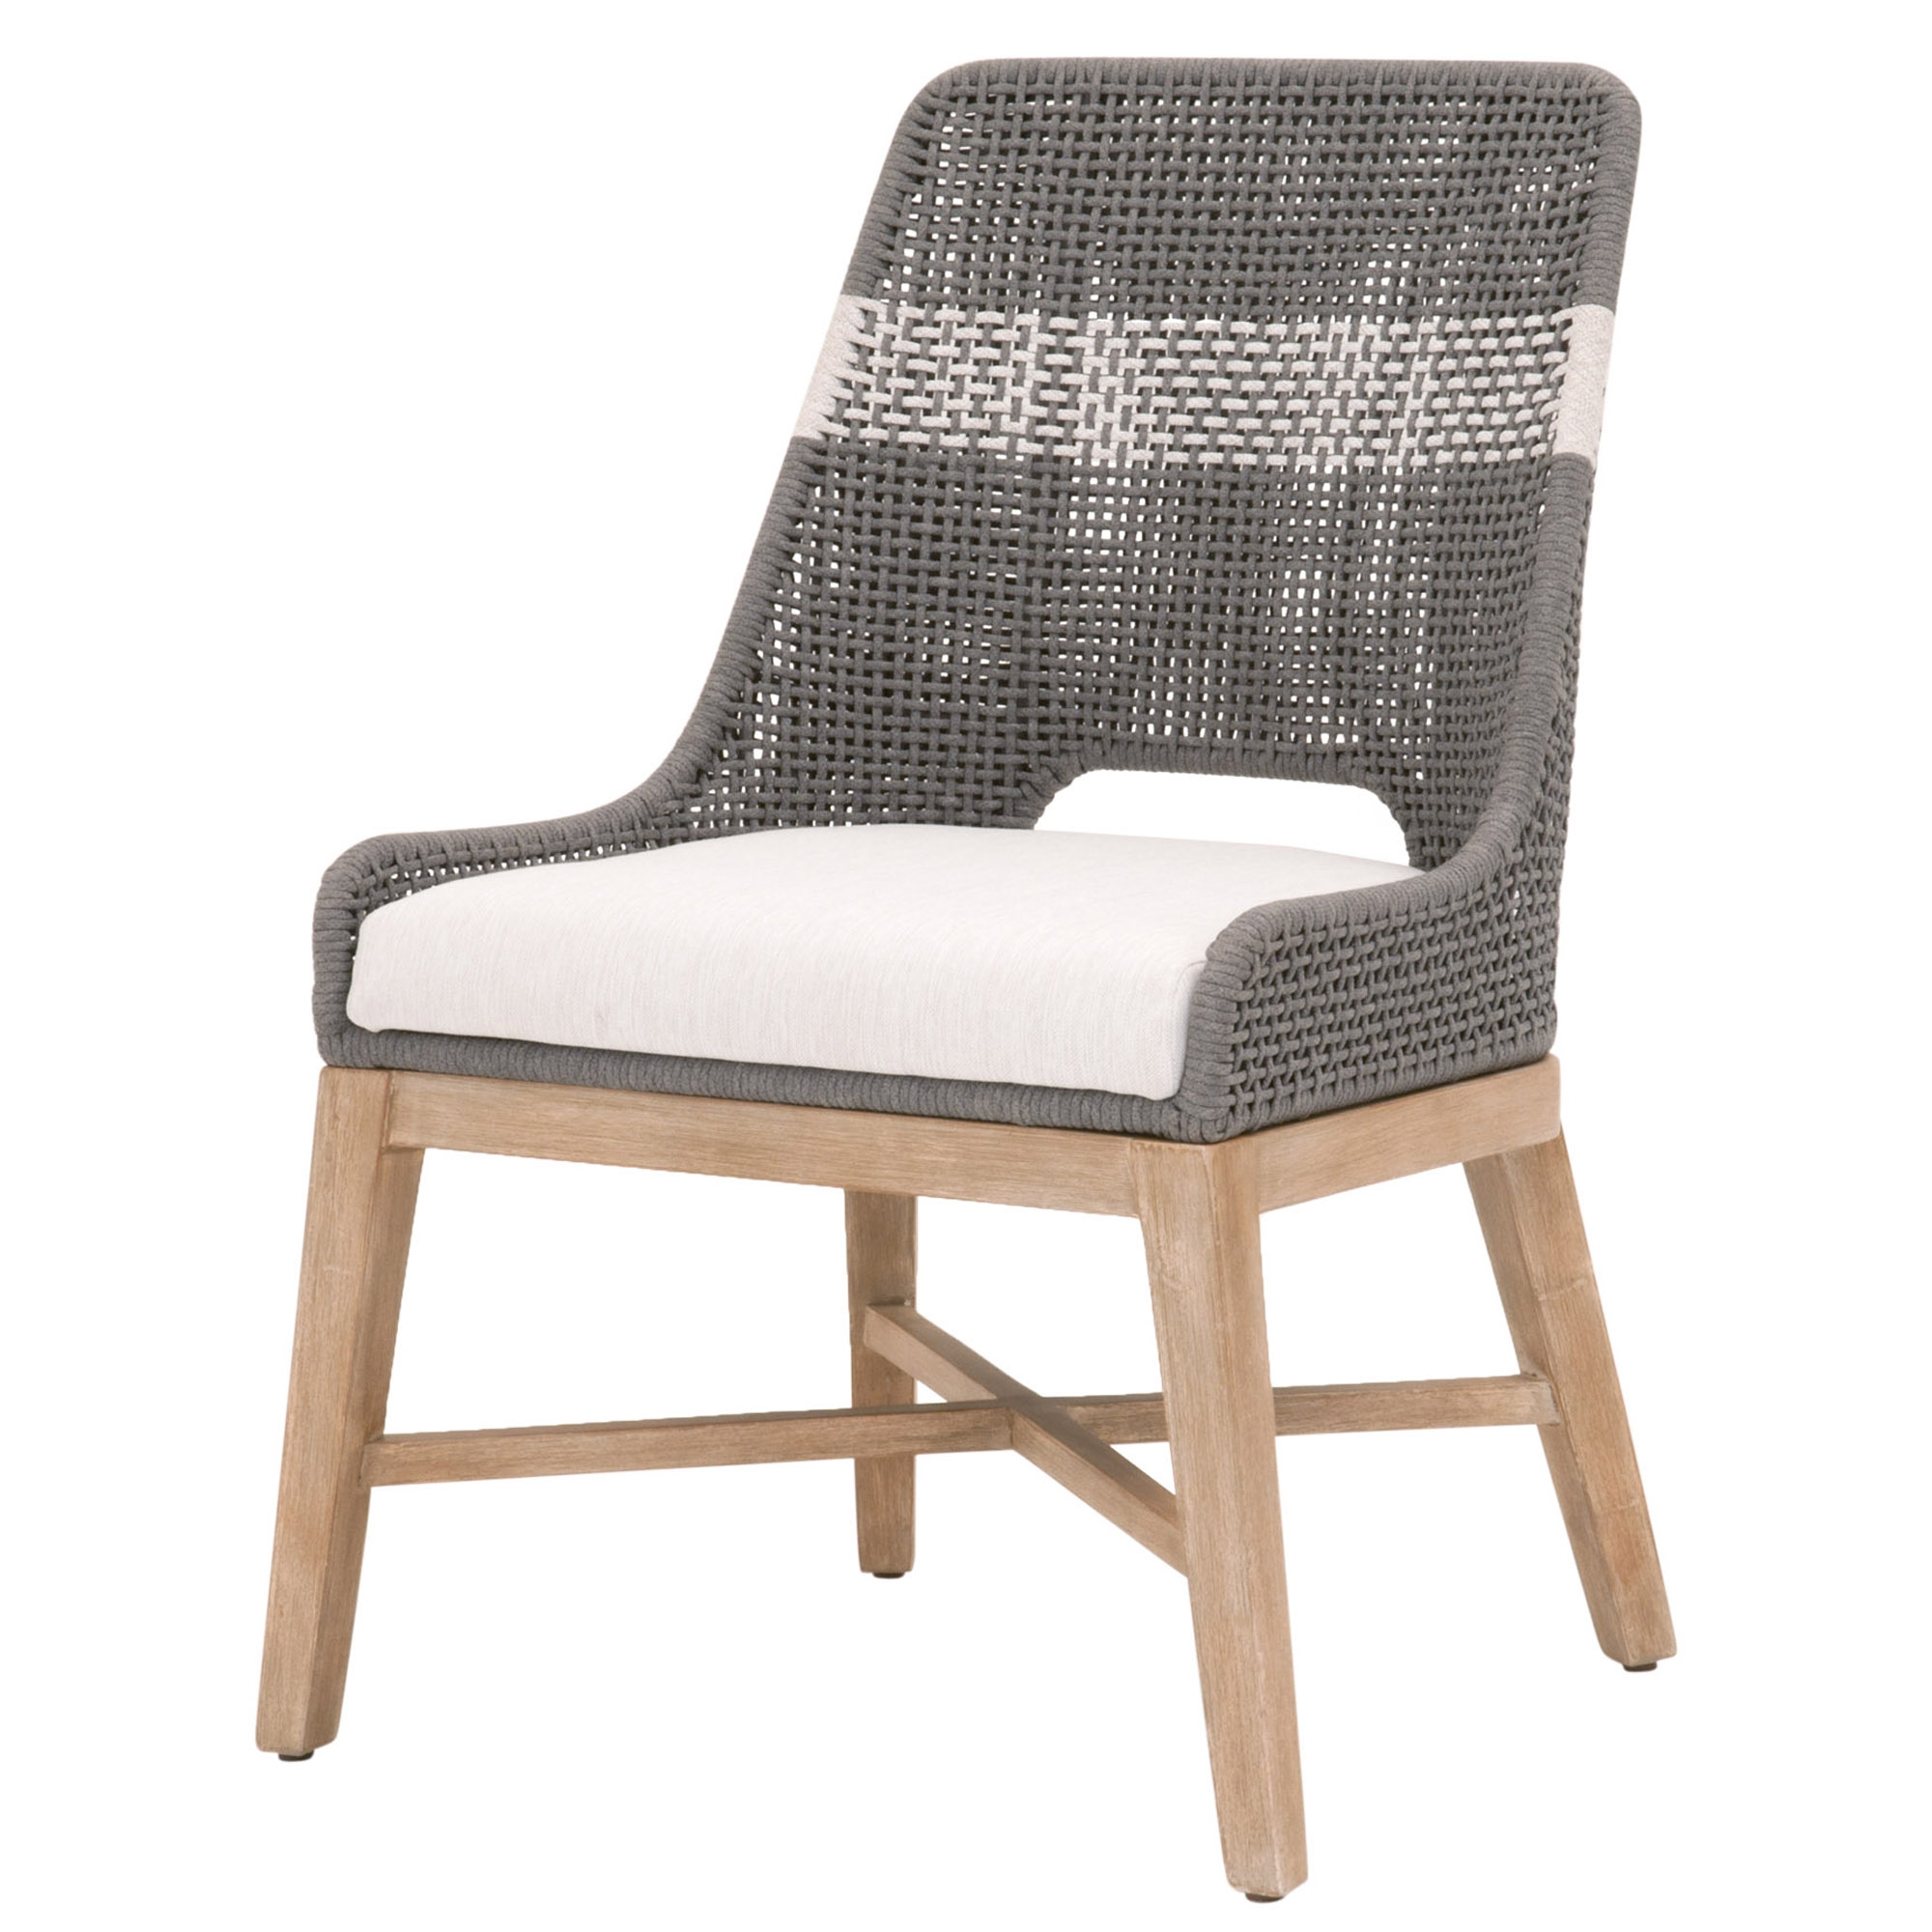 Tapestry Dining Chair, Charcoal, Set of 2 - Image 4